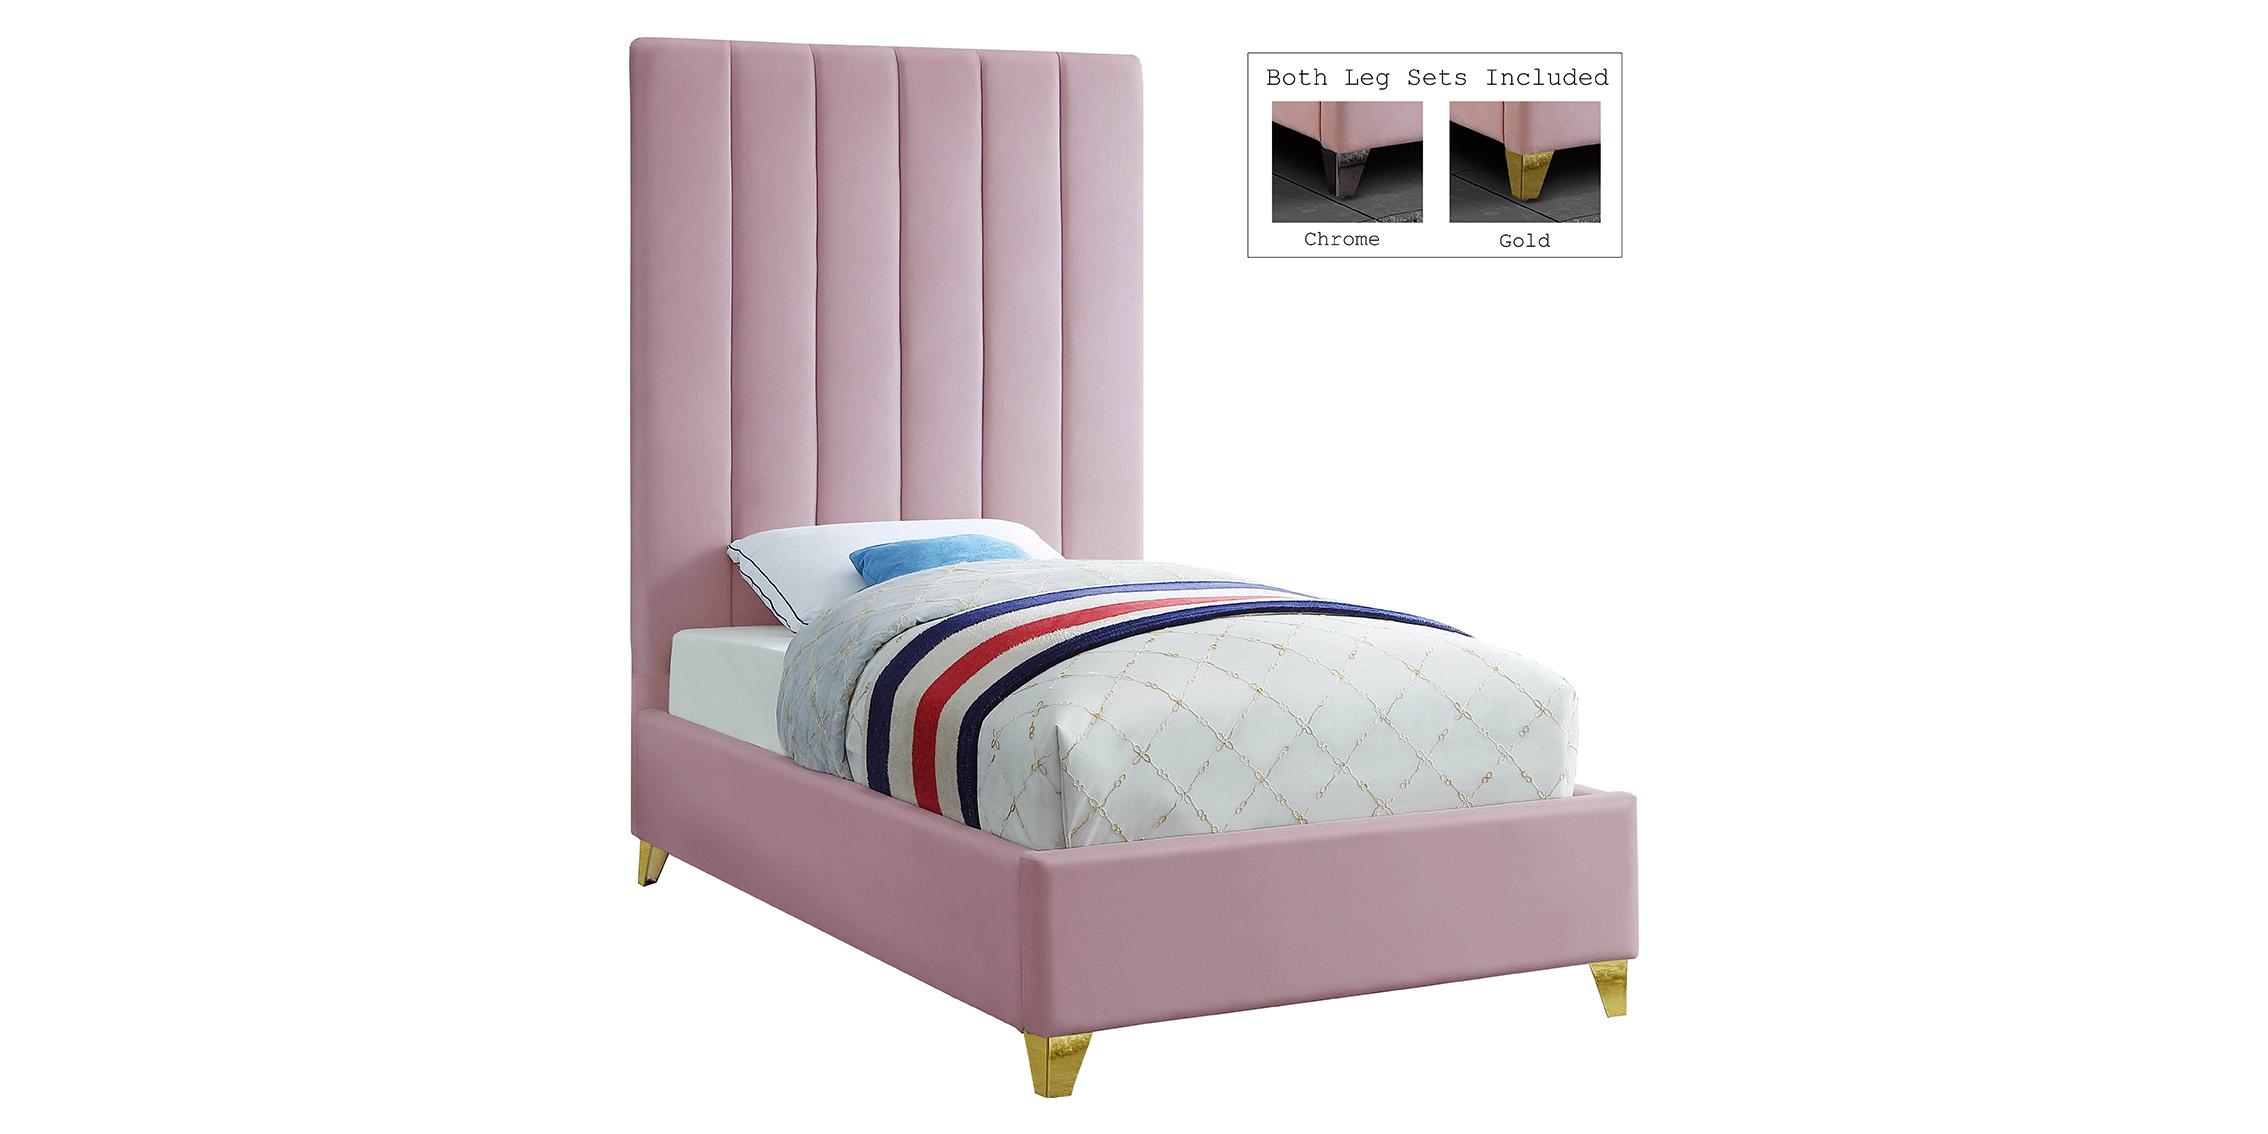 

    
Pink Velvet Channel Tufted Twin Bed VIA ViaPink-T Meridian Contemporary Modern
